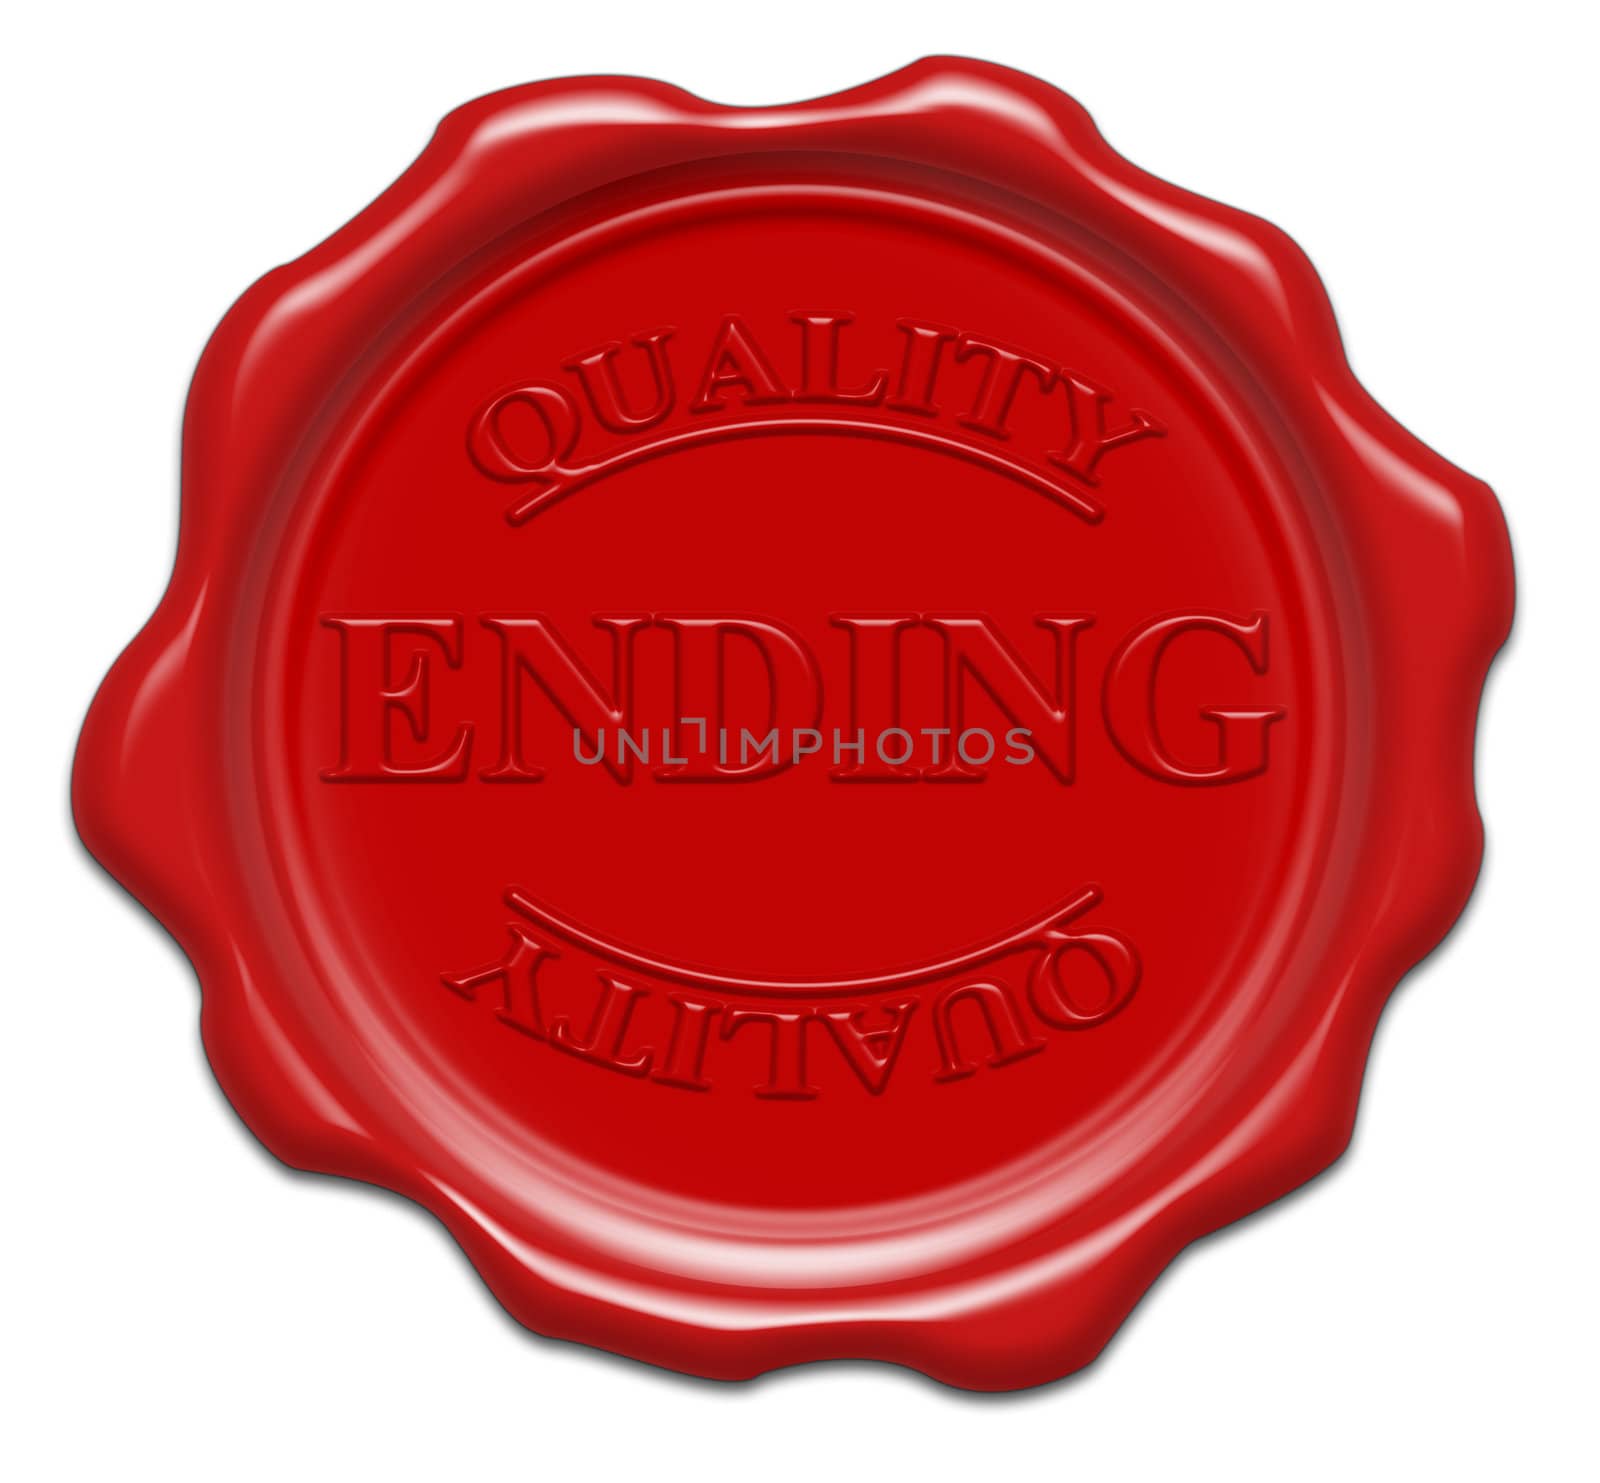 quality ending - illustration red wax seal isolated on white background with word : ending